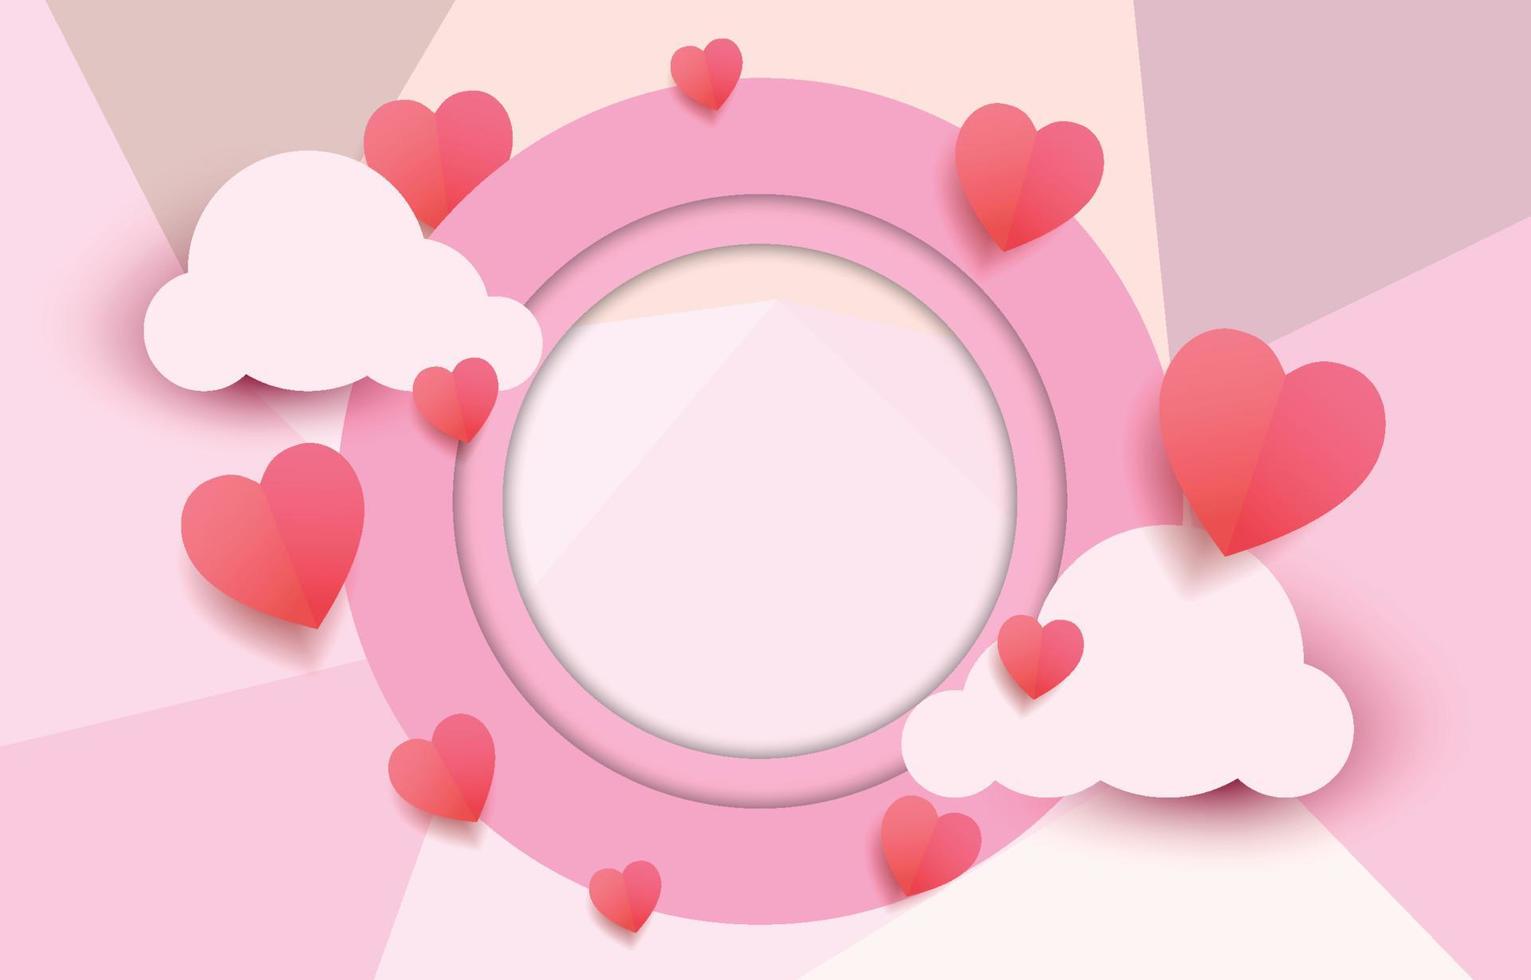 Paper cut elements in shape of heart and cloud with circle frame with a greeting on pink and sweet  background. Vector symbols of love for Happy Valentine's Day, greeting card design.